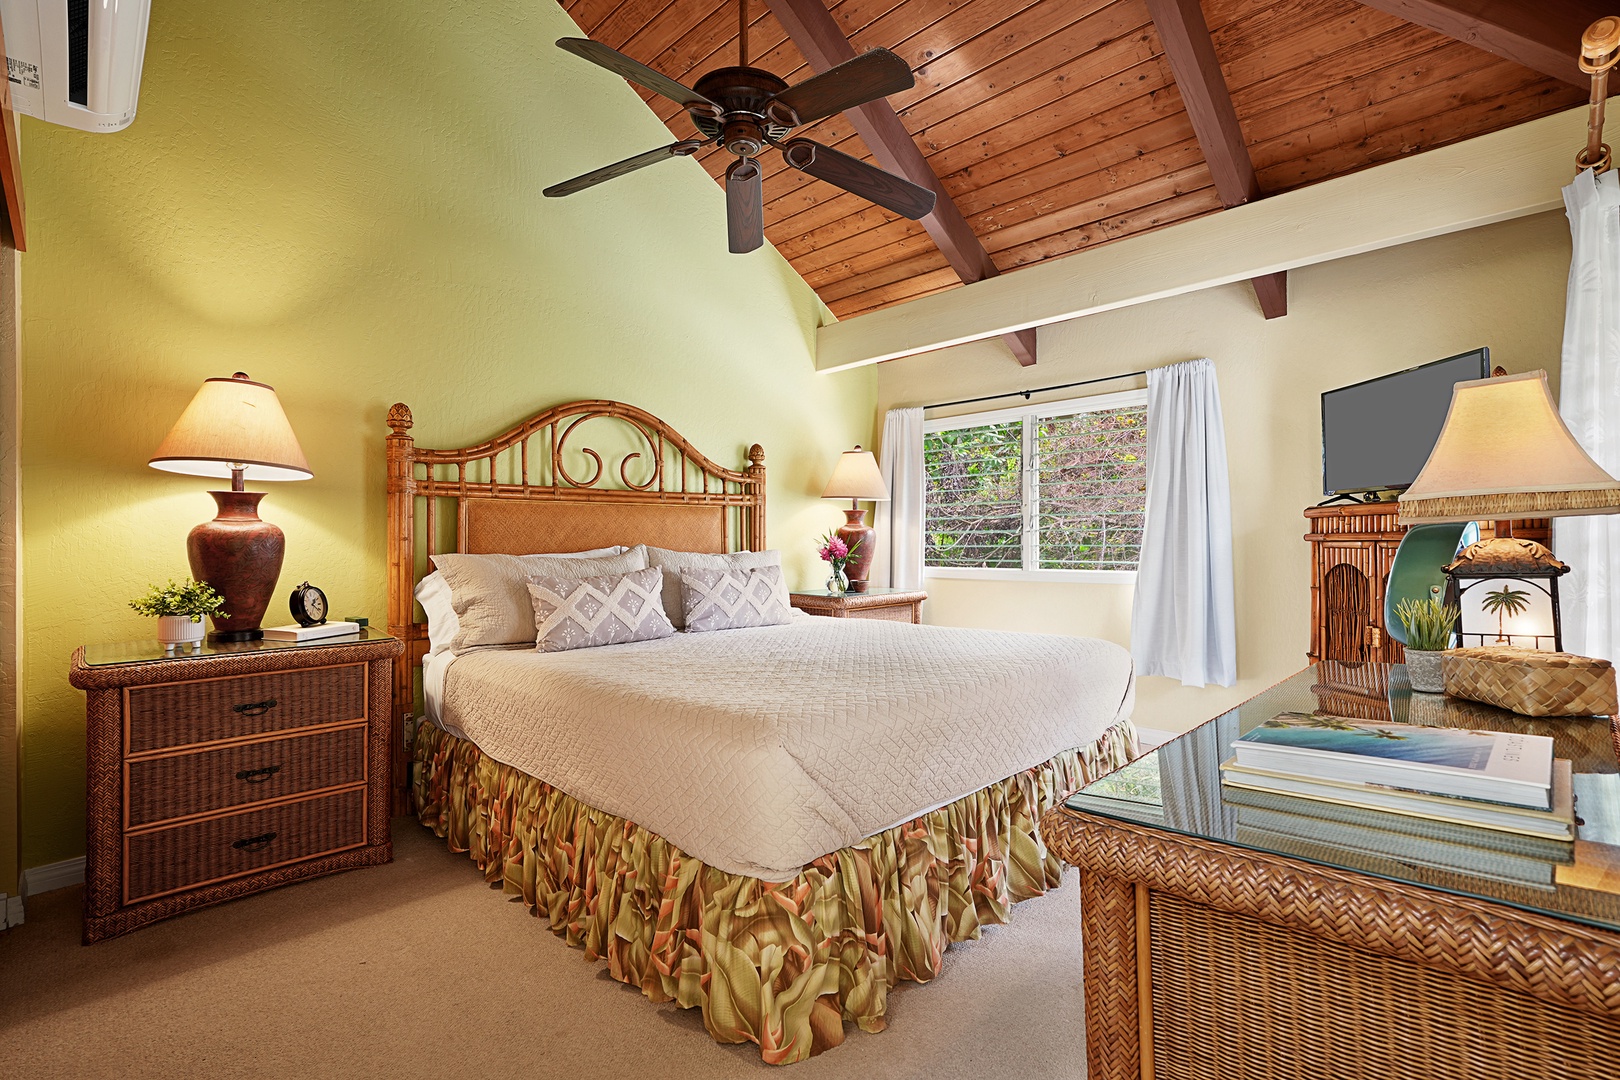 Koloa Vacation Rentals, Kauai Birdsong at Poipu Crater - The primary bedroom has a king-sized bed, split AC and ceiling fan.